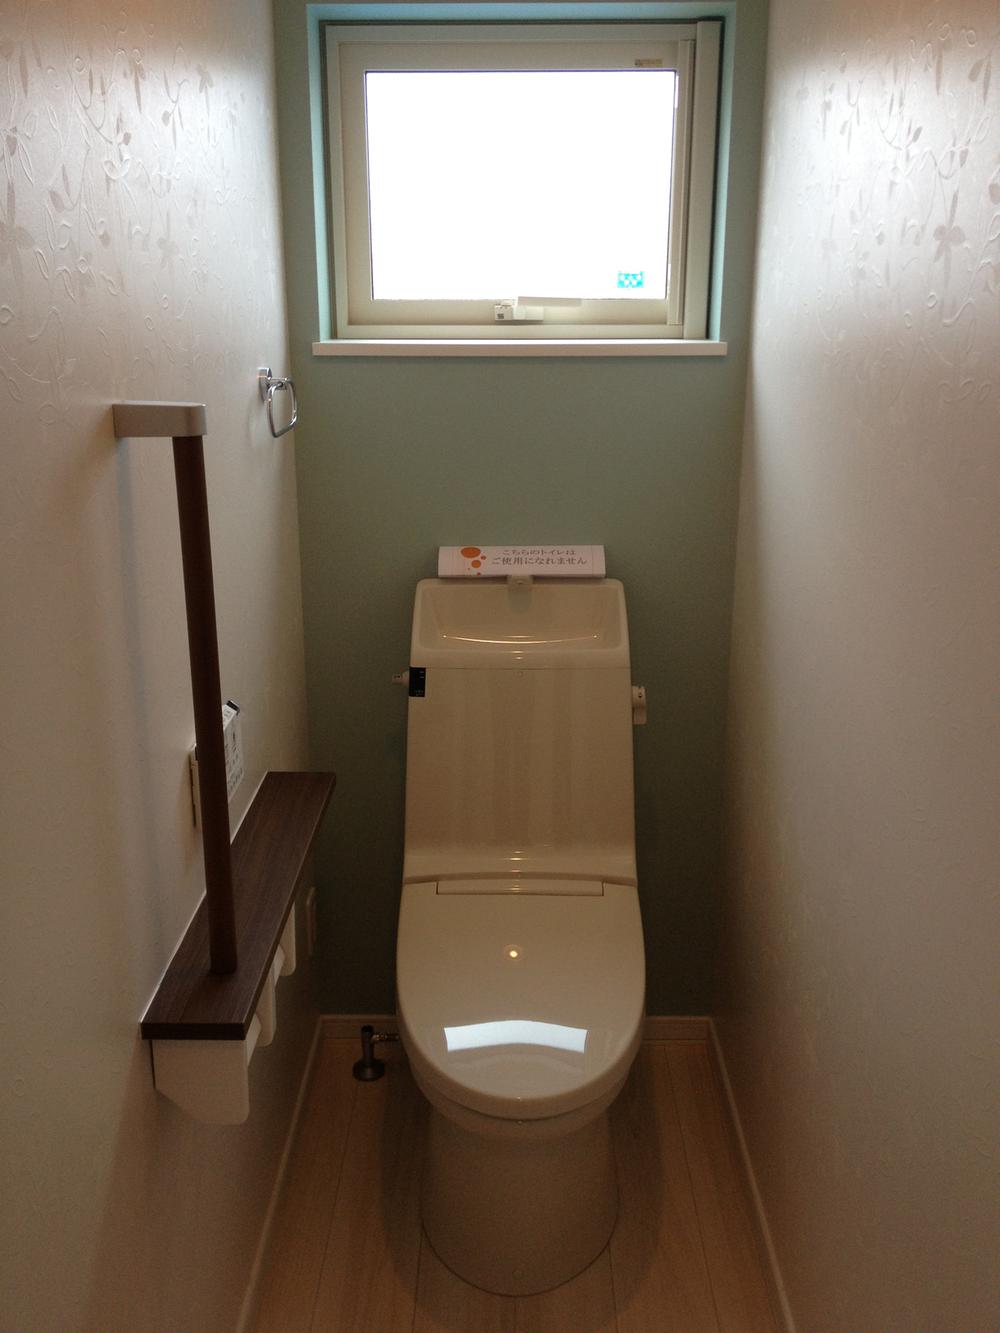 Construction ・ Construction method ・ specification. There and I'm glad the second floor toilet.